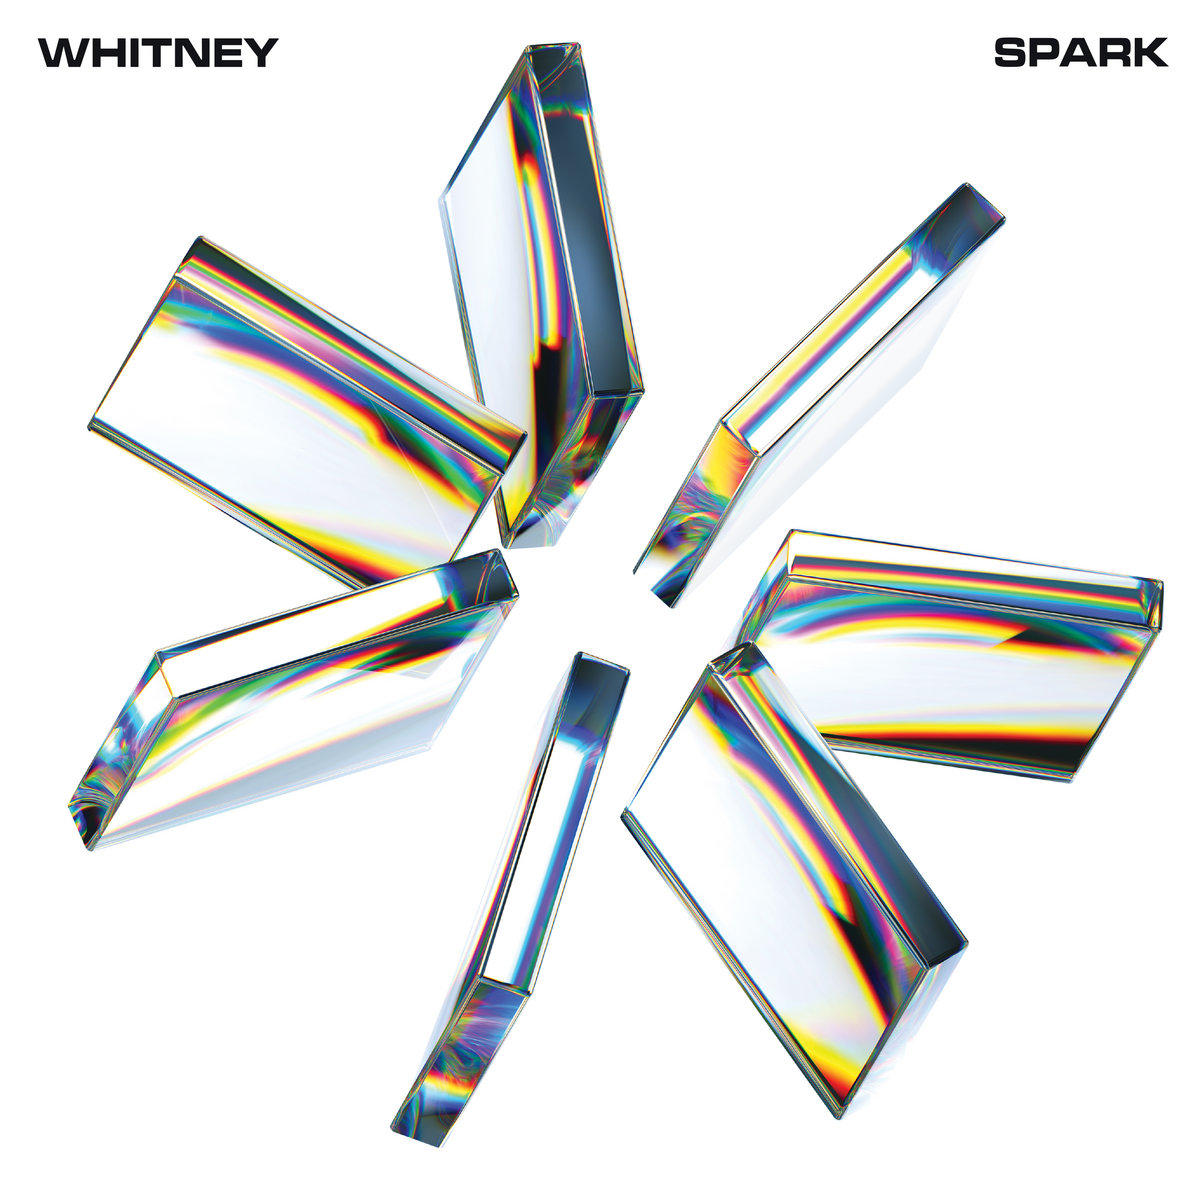 Whitney, "SPARK" album cover. Features 7 metallic squares floating around each other in a circle forming an asterisk-like shape.